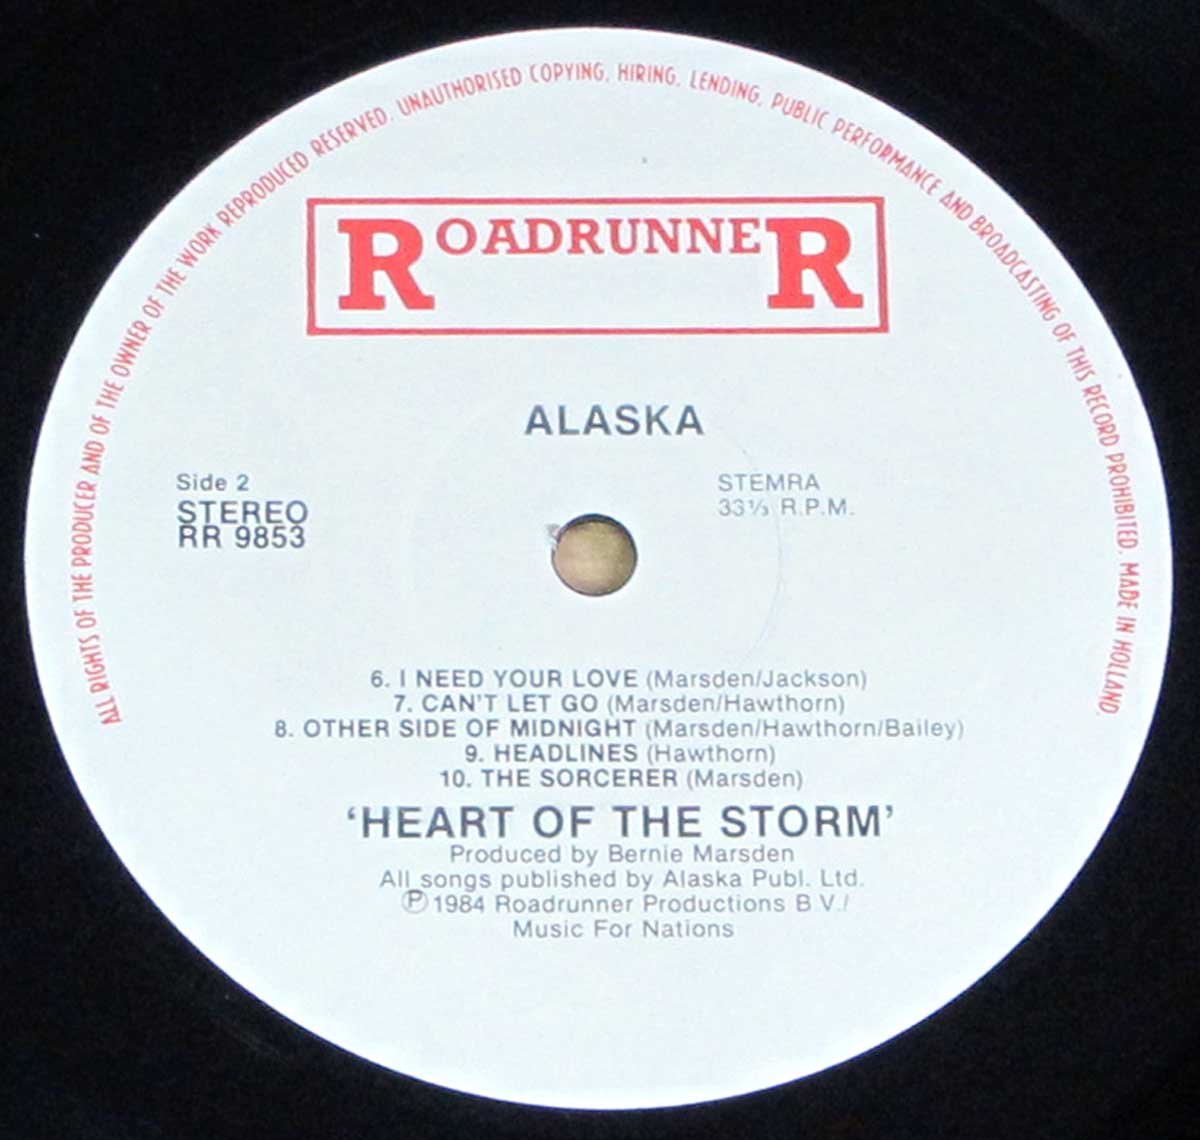 Enlarged High Resolution Photo of the Record's label Heart of the Storm https://vinyl-records.nl